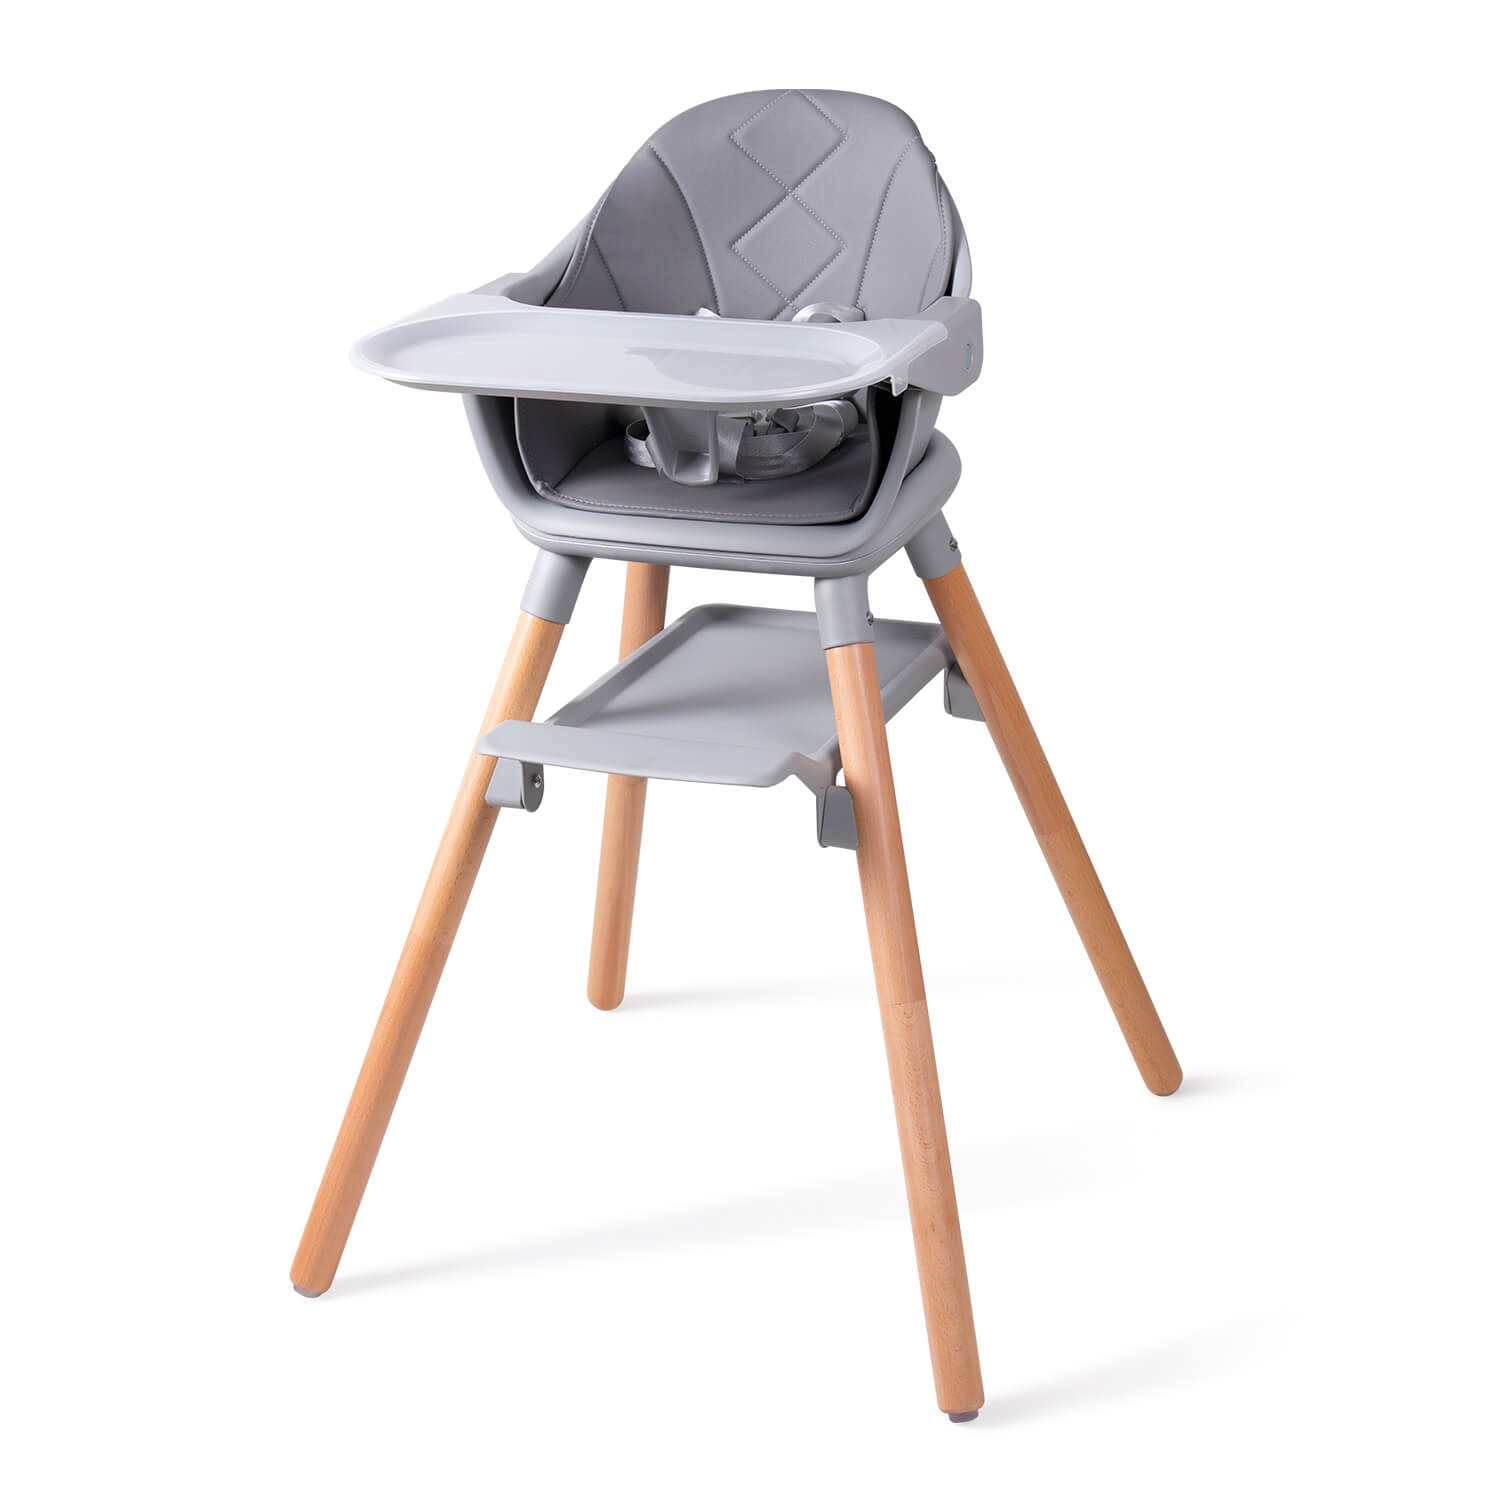 4-in-1 Baby High Chair - Outlet Deal Item